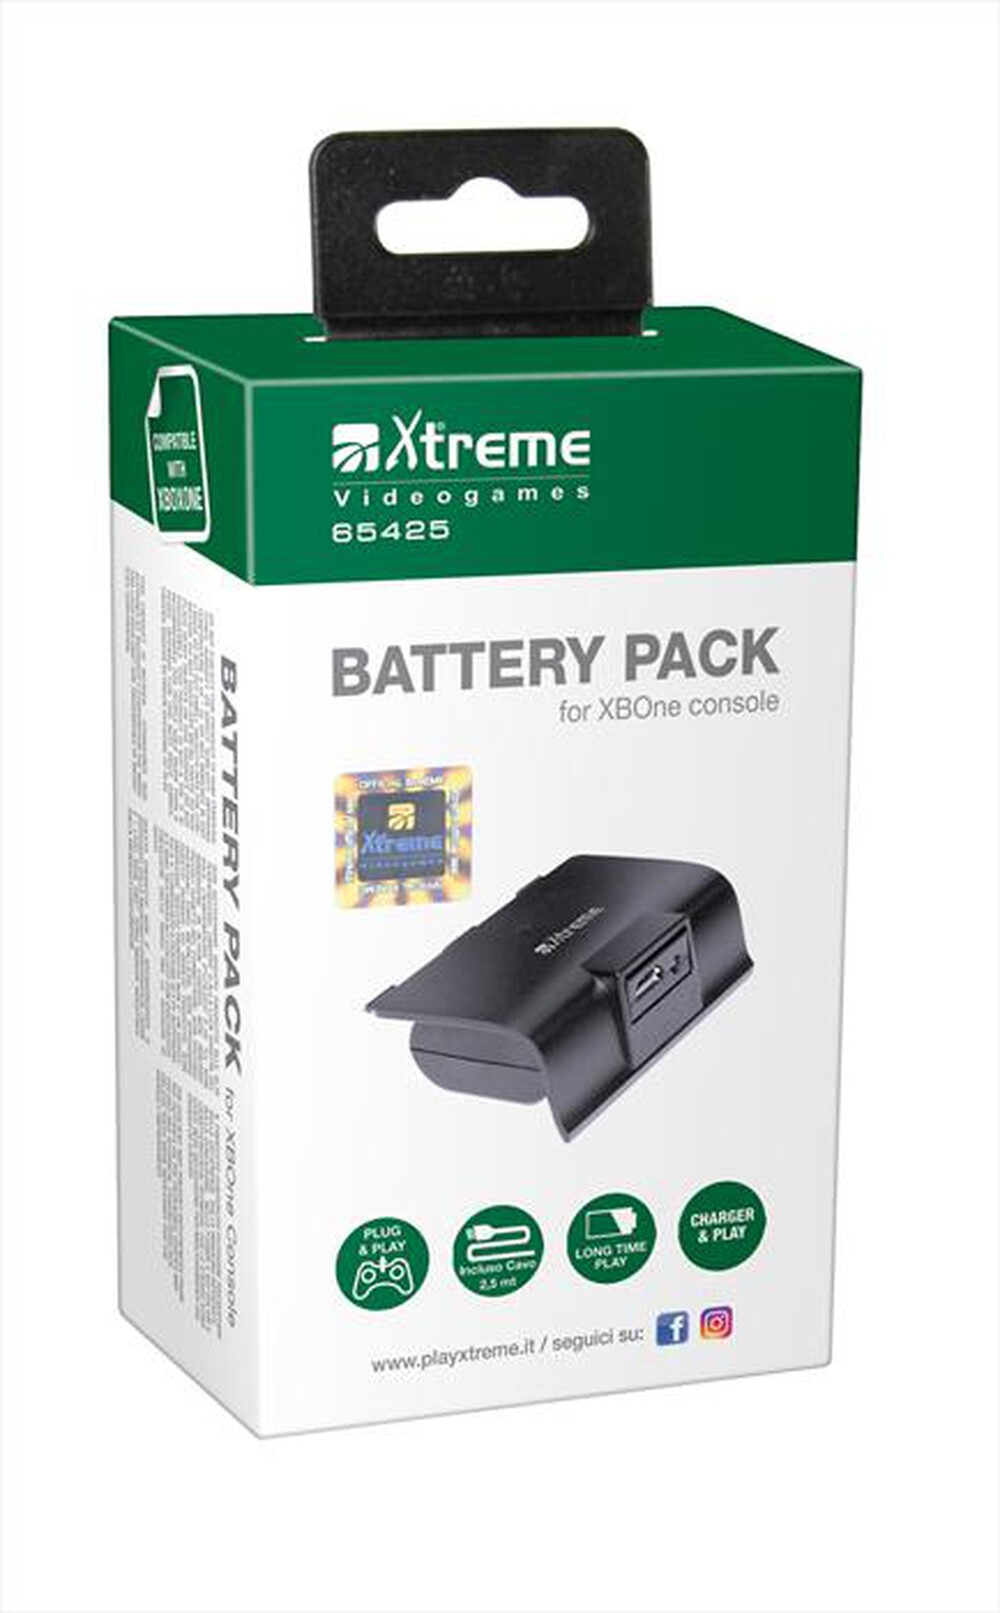 "XTREME - 65425 - Xbox One Battery Pack + Power Cable"